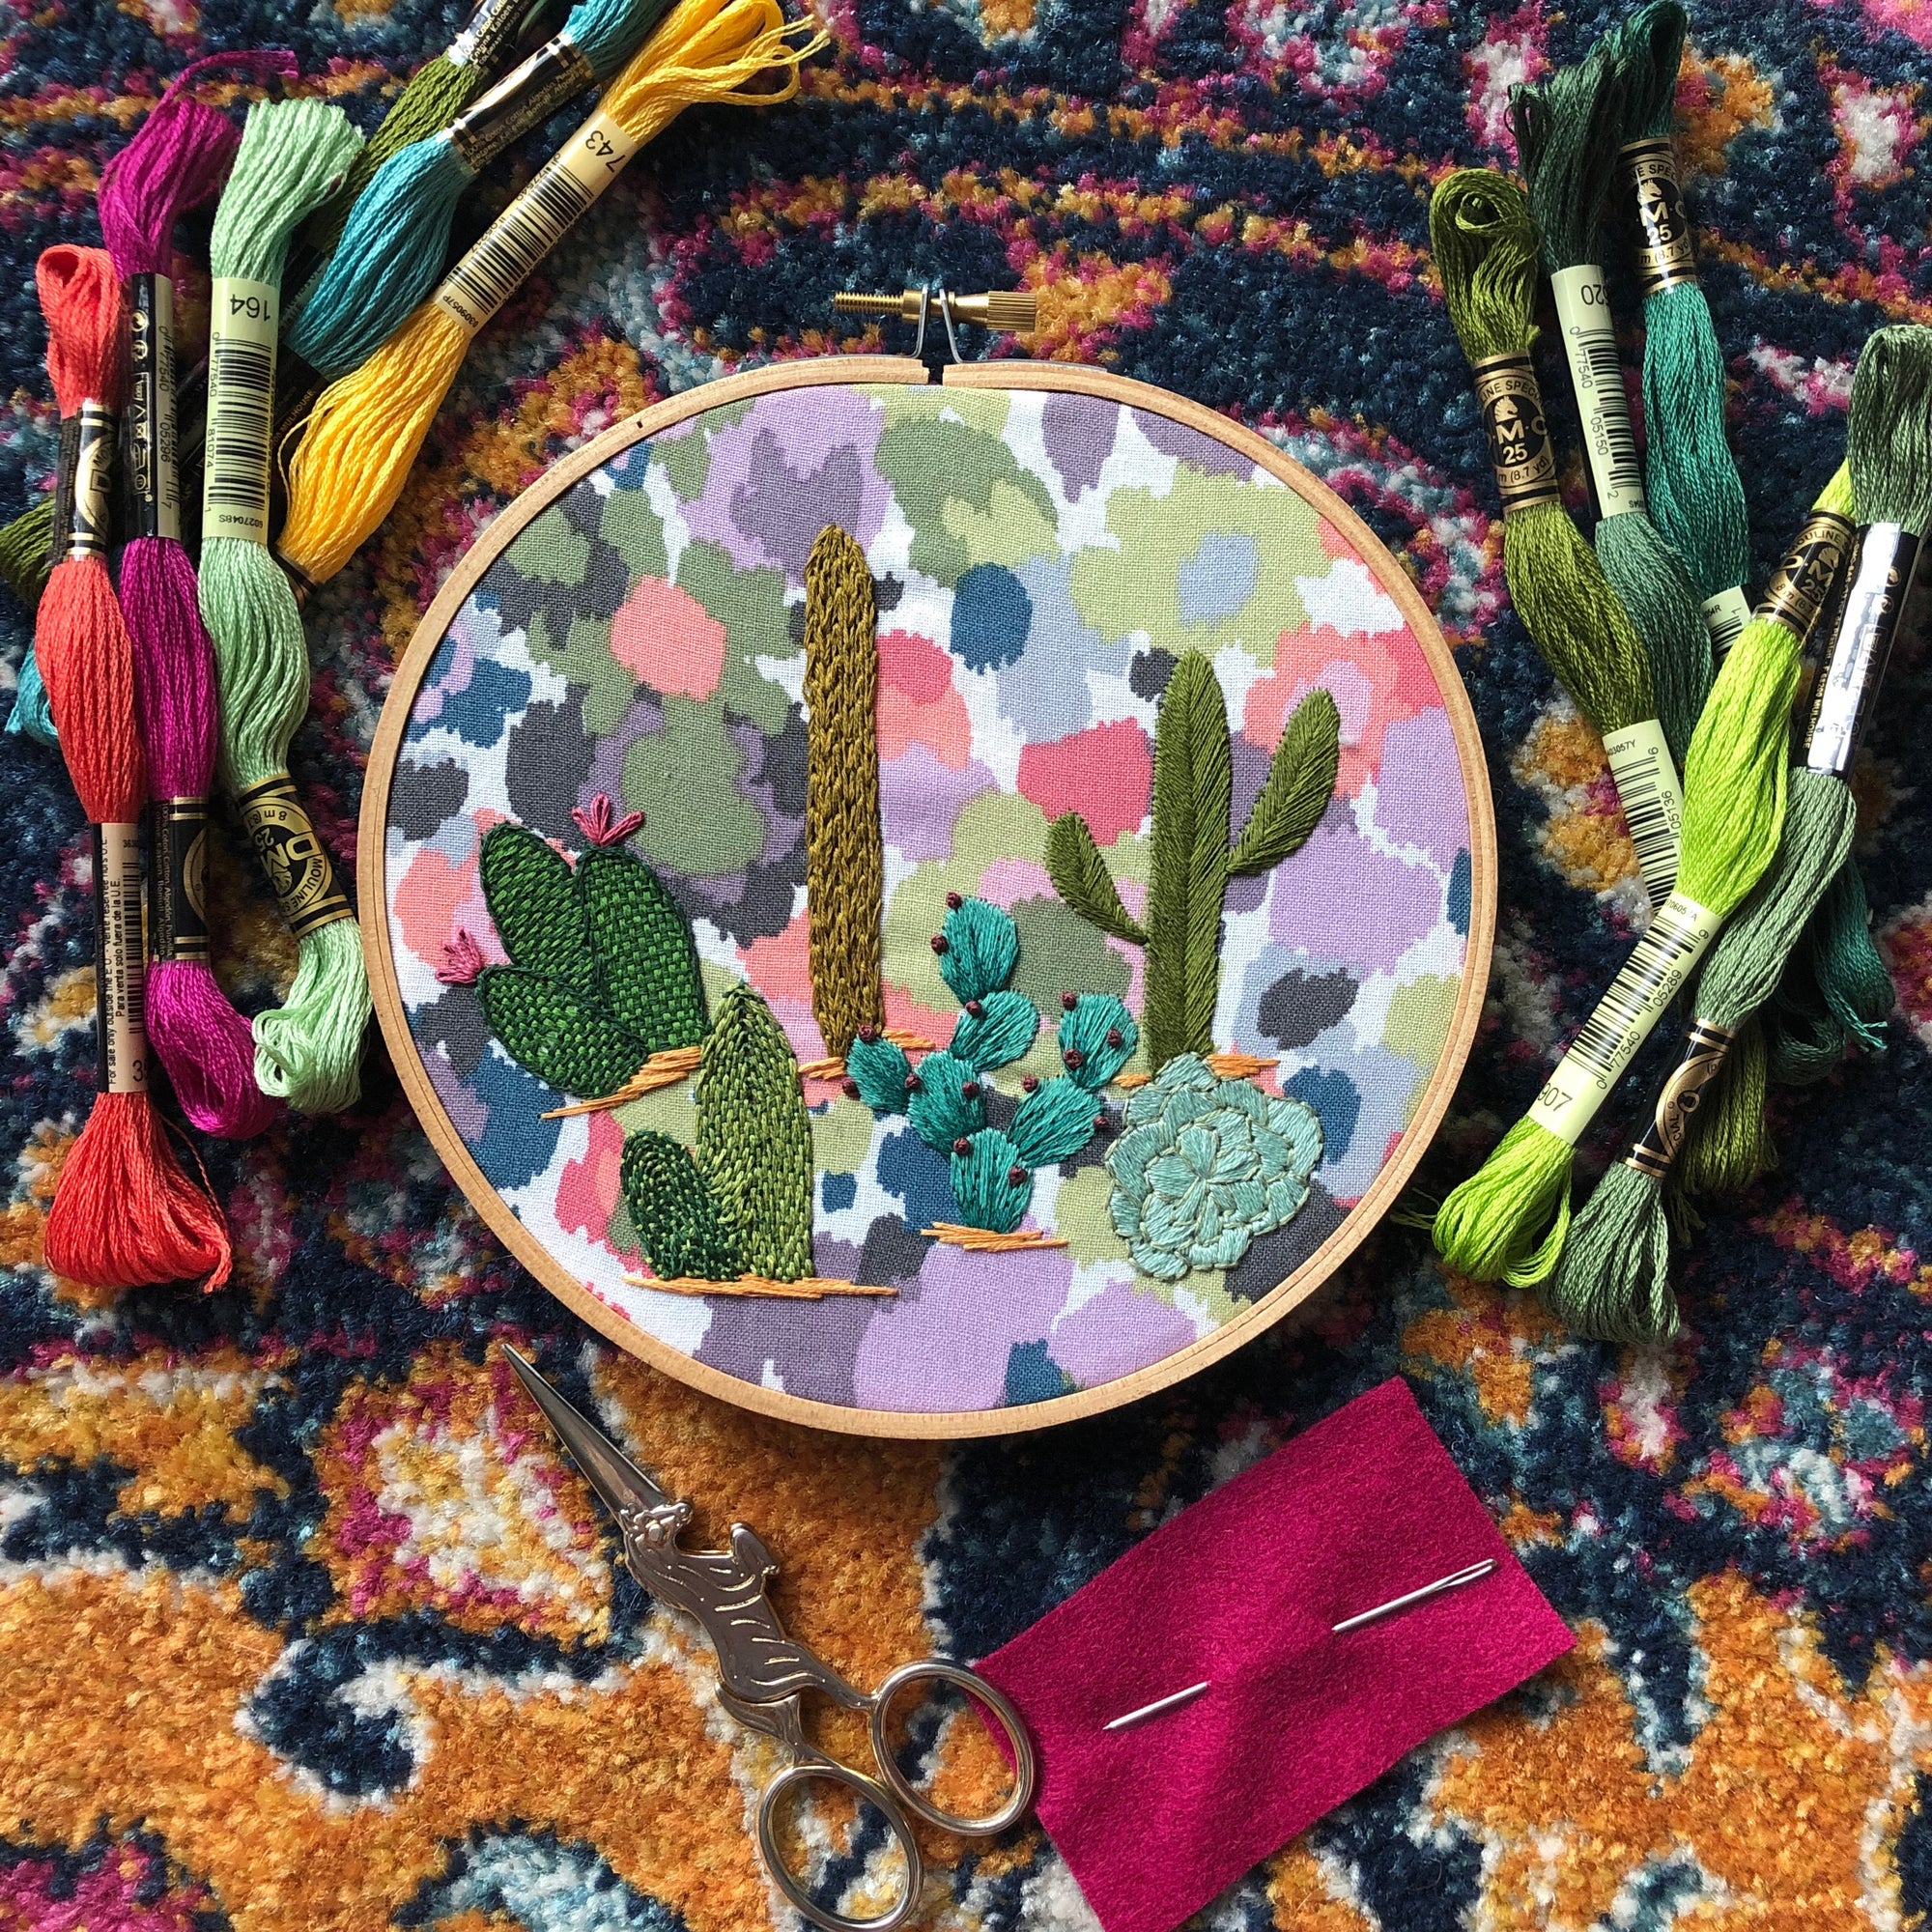 EMBROIDERY CLASS: Cactus Embroidery Basics